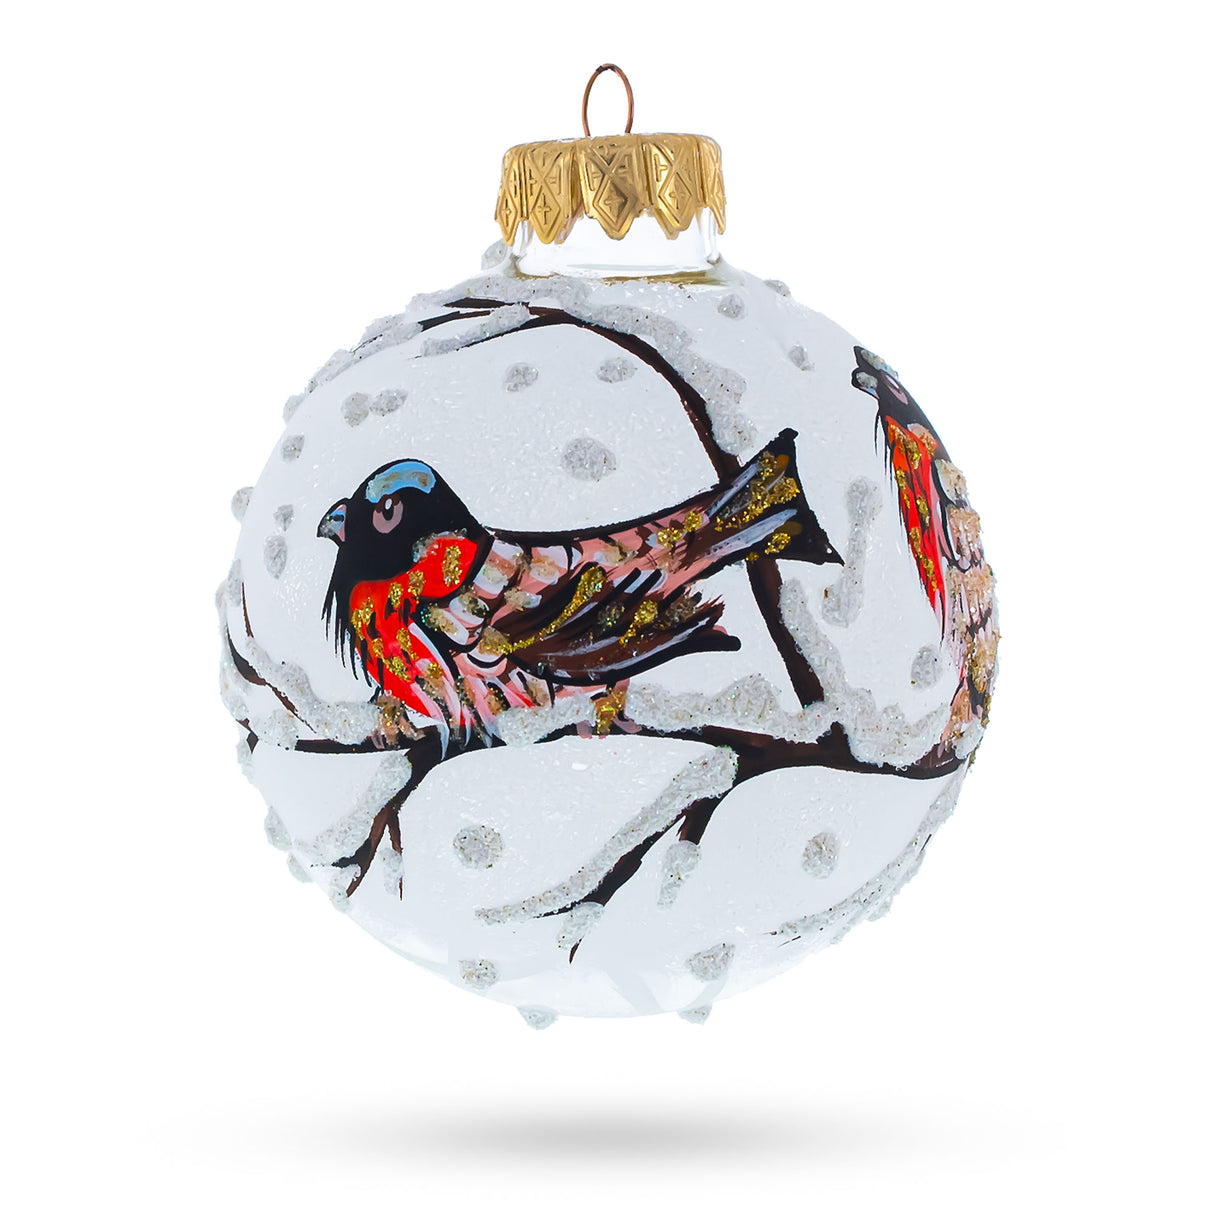 Glass Charming Birds on a Snowy Branch - Blown Glass Ball Christmas Ornament 3.25 Inches in White color Round